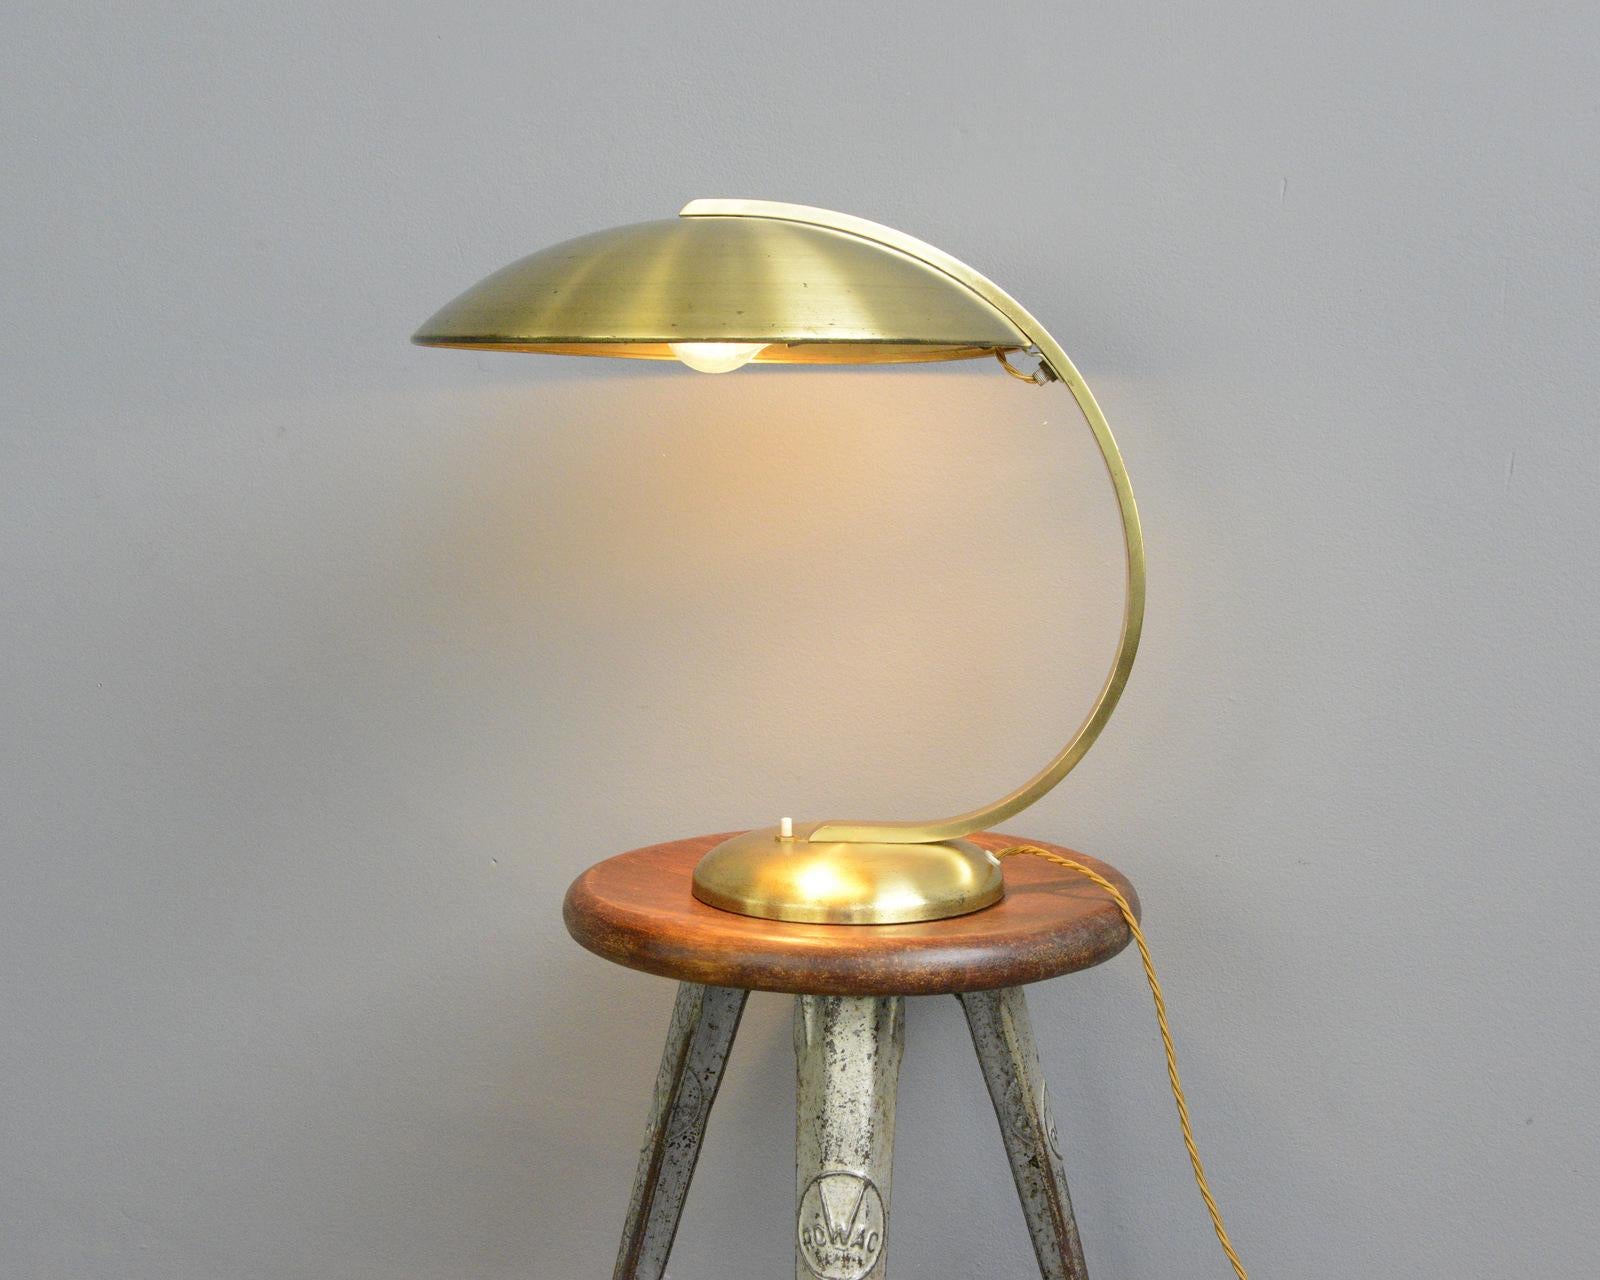 Bauhaus brass table lamp by Hillebrand circa 1930s

- Fully brass
- Takes E27 fitting bulbs
- On/Off switch on the base
- Made by Hillebrand 
- German ~ 1930s
- Measures: 39cm tall x 40cm wide x 44cm deep

Hillebrand

Hillebrand Leuchten